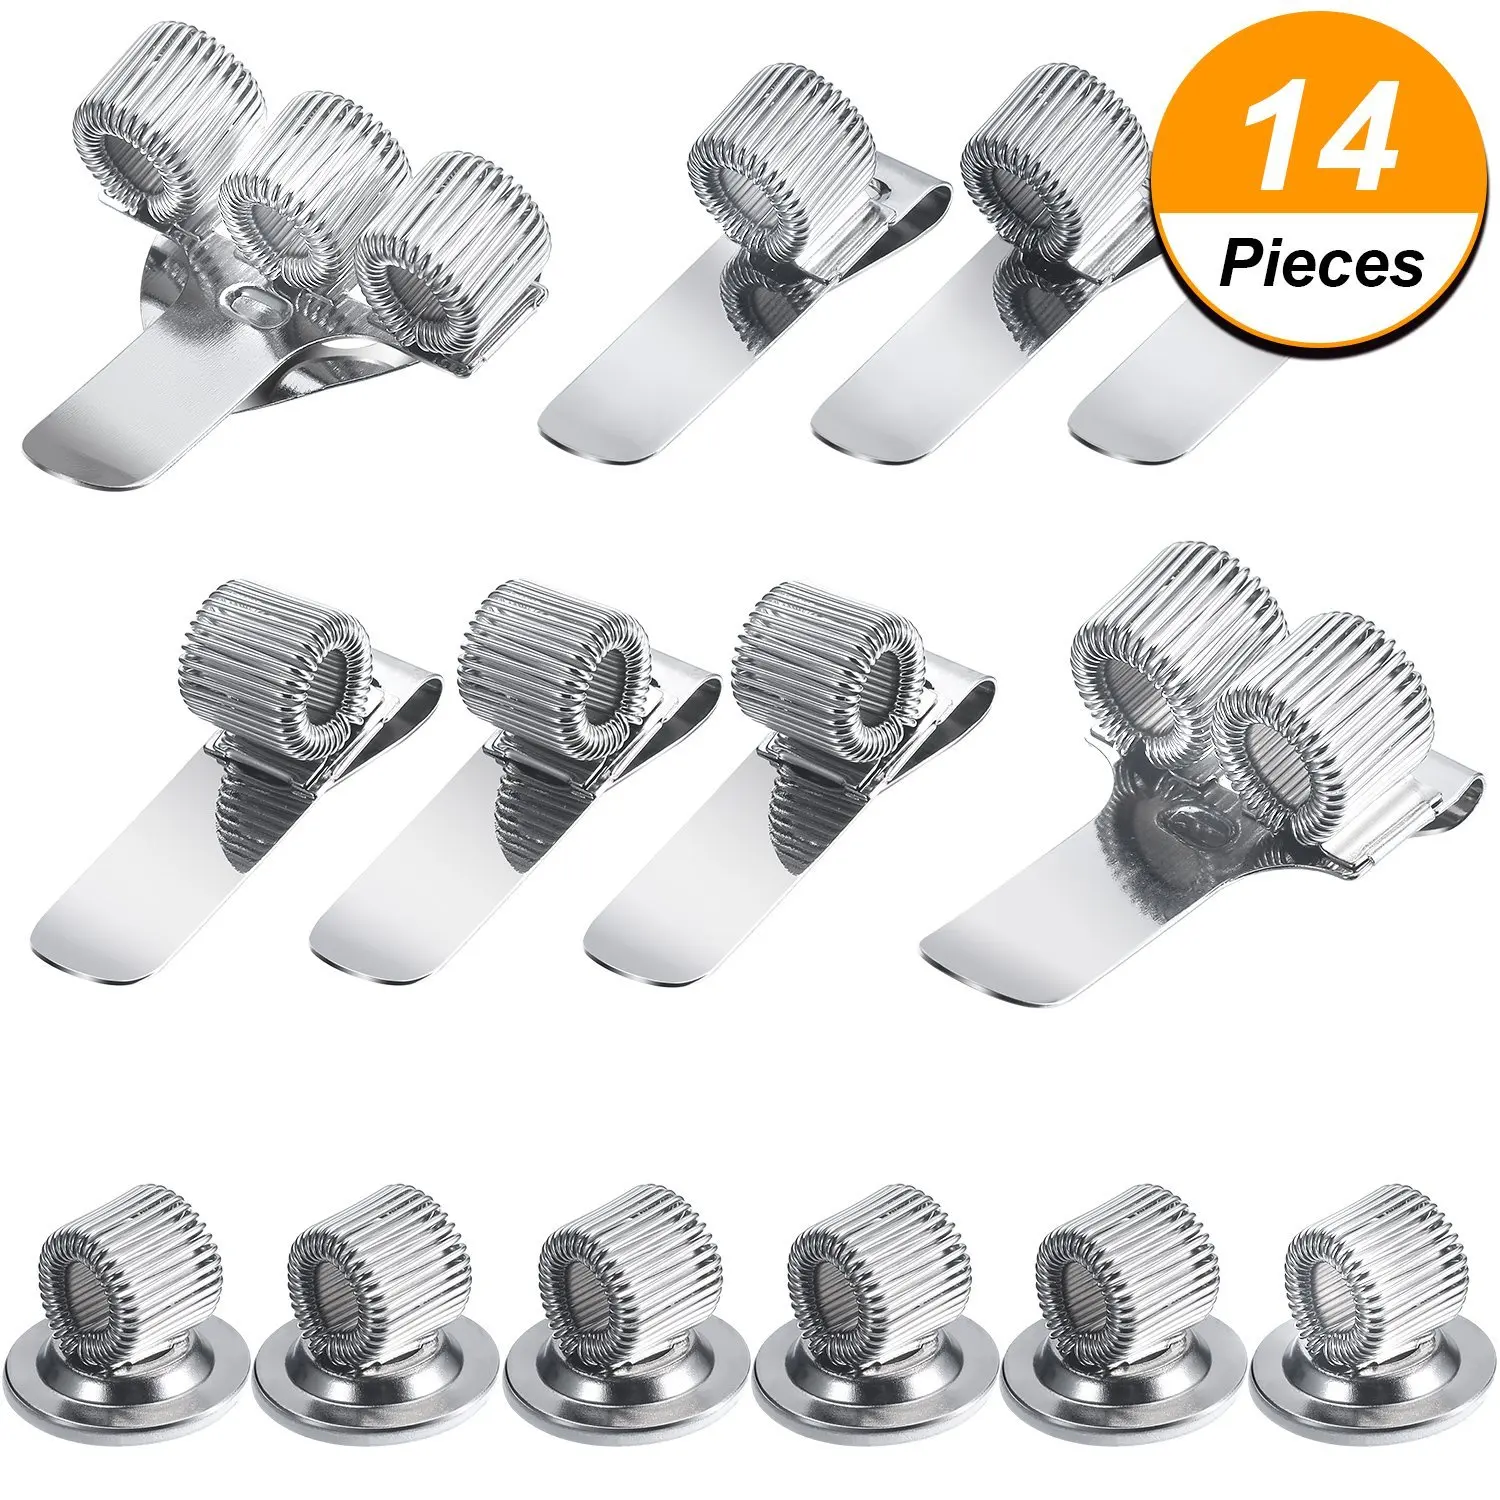 Cheap Screen Spring Clips Find Screen Spring Clips Deals On Line At